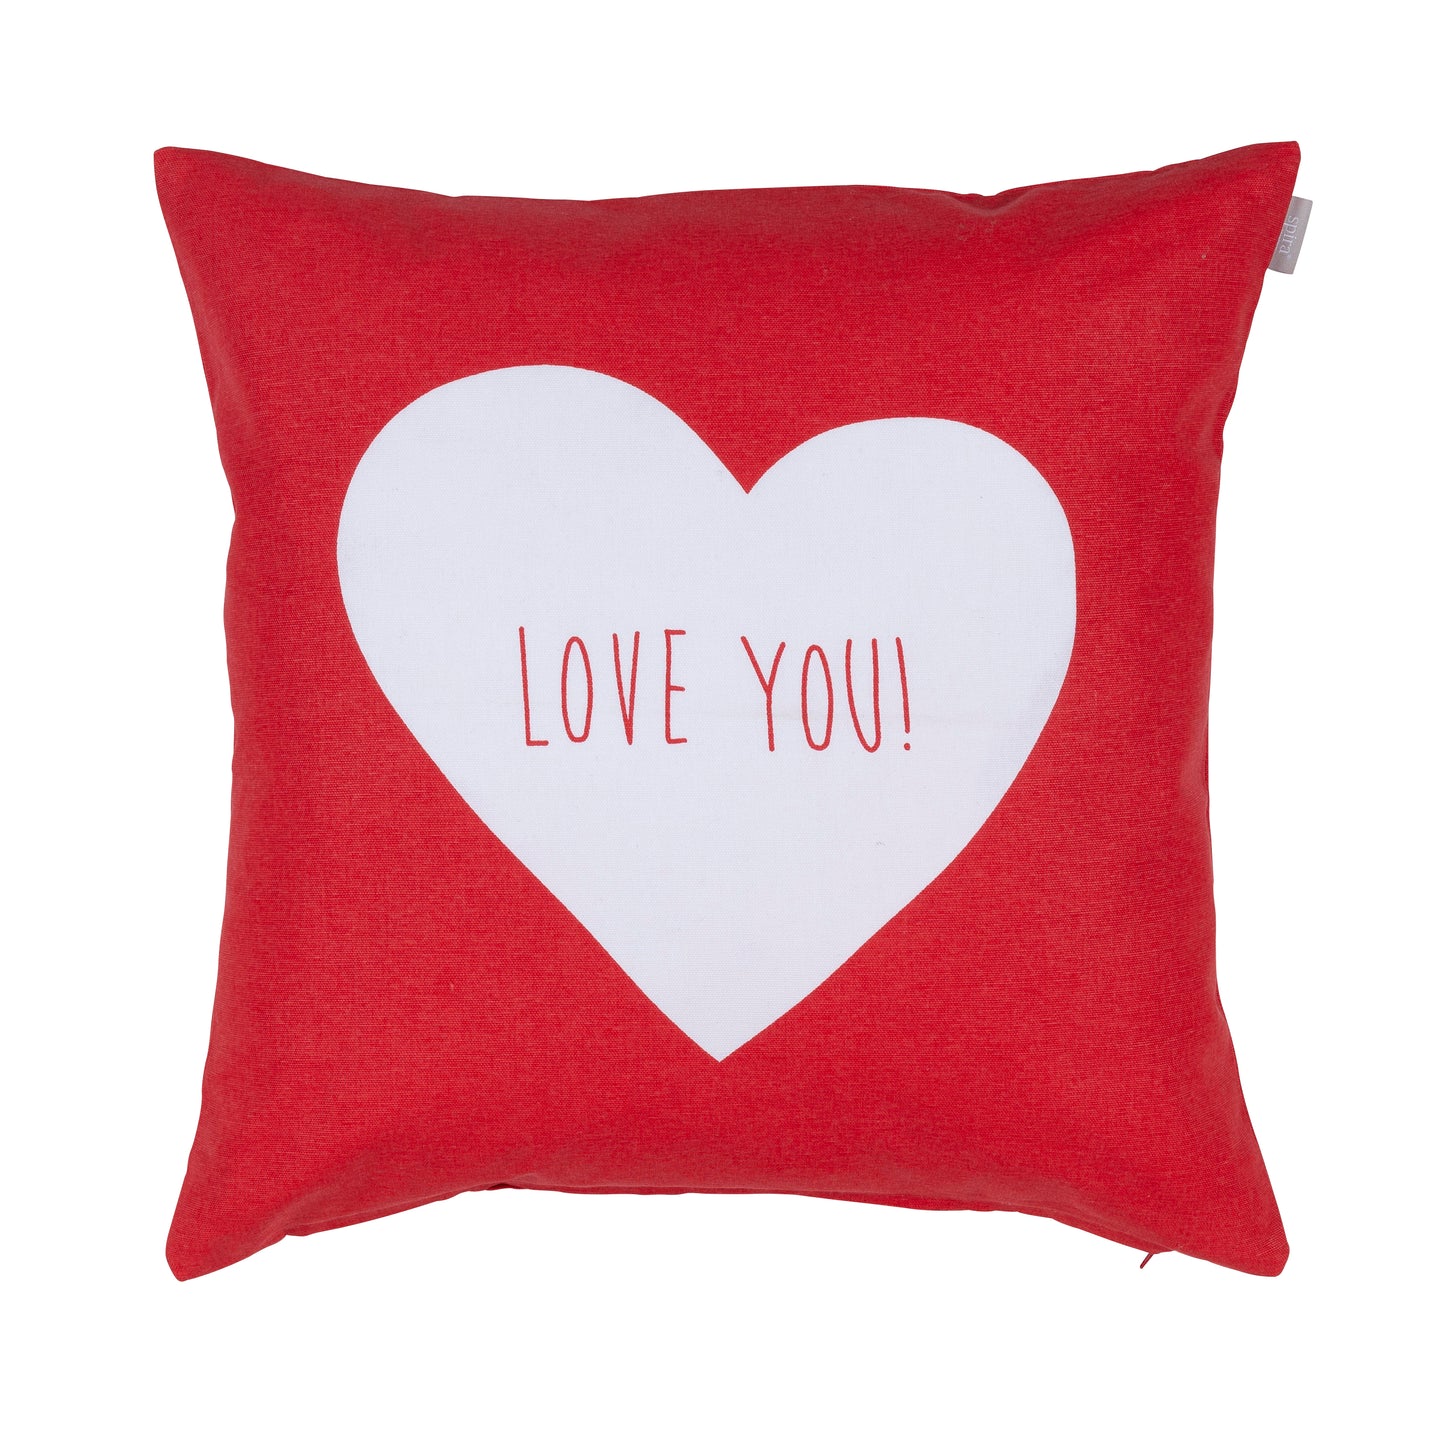 Love You Bubble cushion/cover